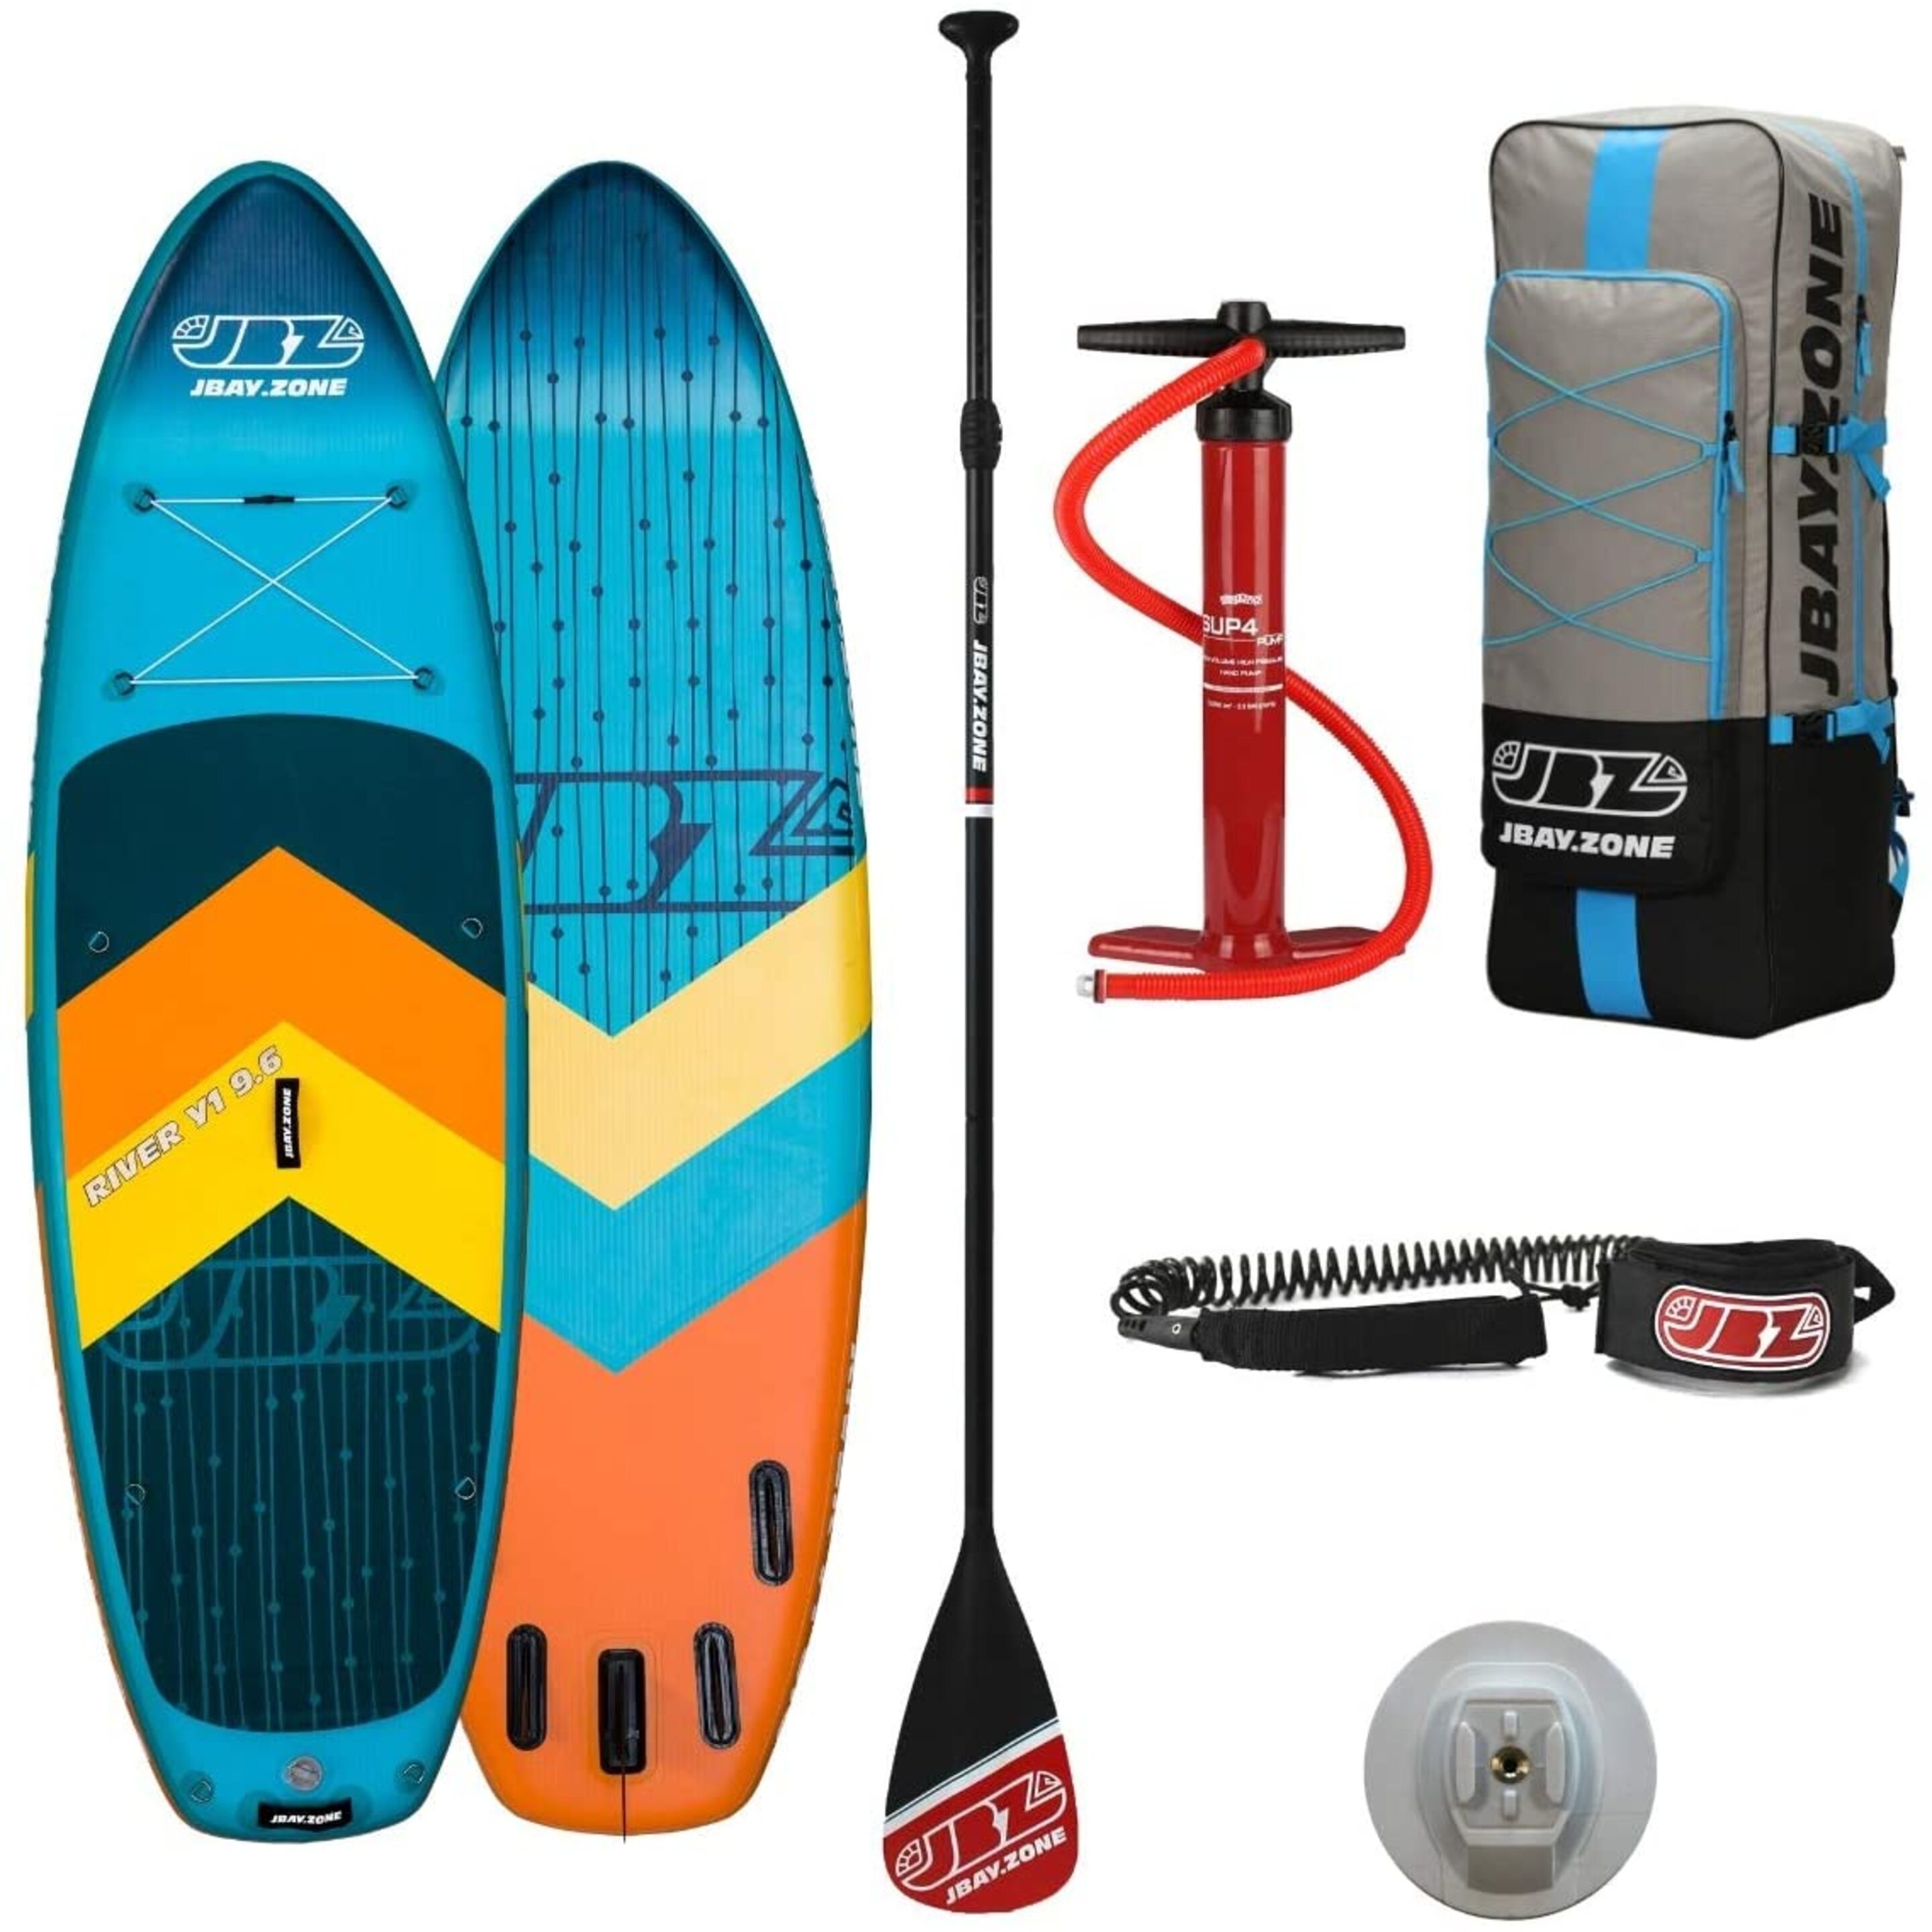 Tabla De Stand Up Paddle Surf Hinchable Jbay.zone Sup River Y1  Whitewater Sup - amarillo-verde - 